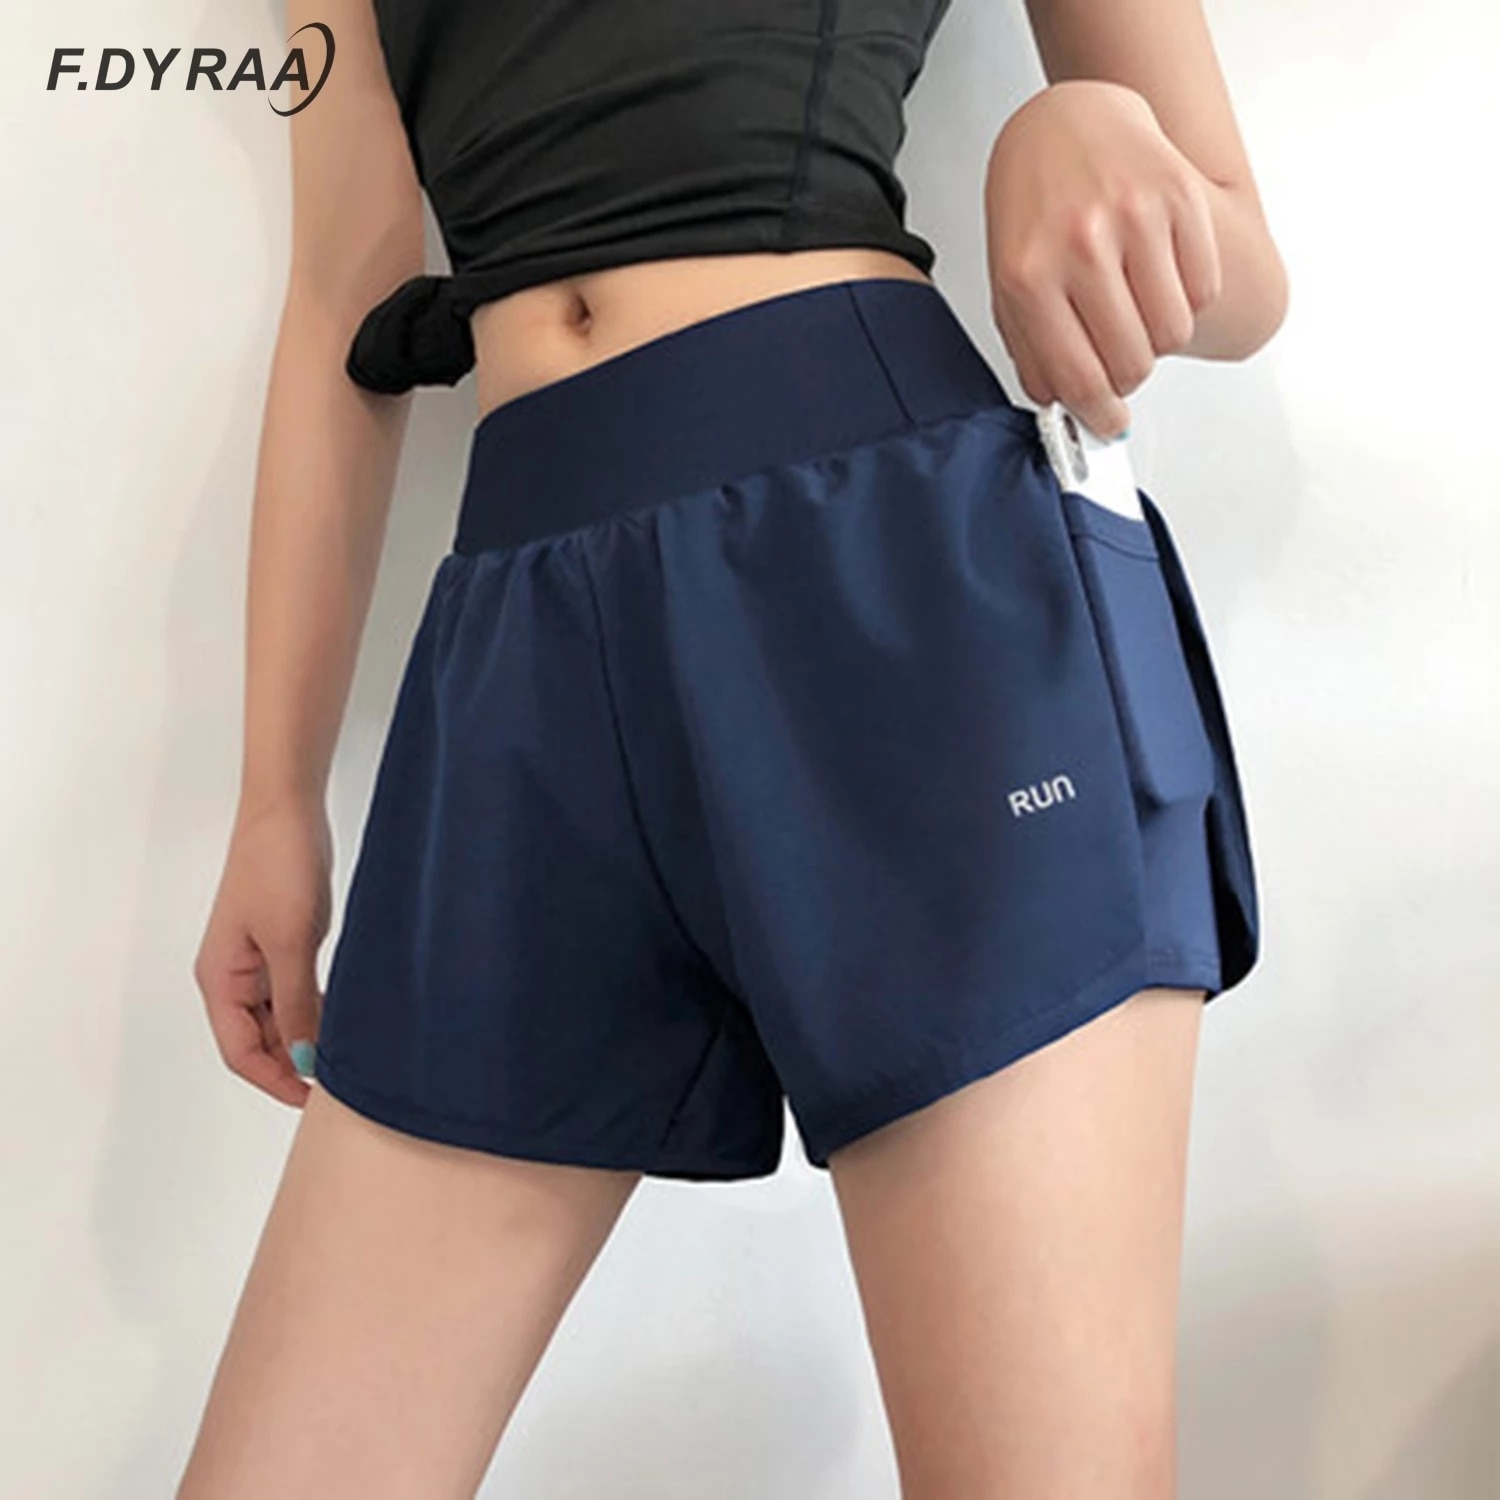 shop with crypto buy F.DYRAA Women 2 In 1 Running Shorts Elastic Waist Pocket Tight Yoga Short Woman Sports Shorts Pink Gym Fitness Shorts Sportswear pay with bitcoin